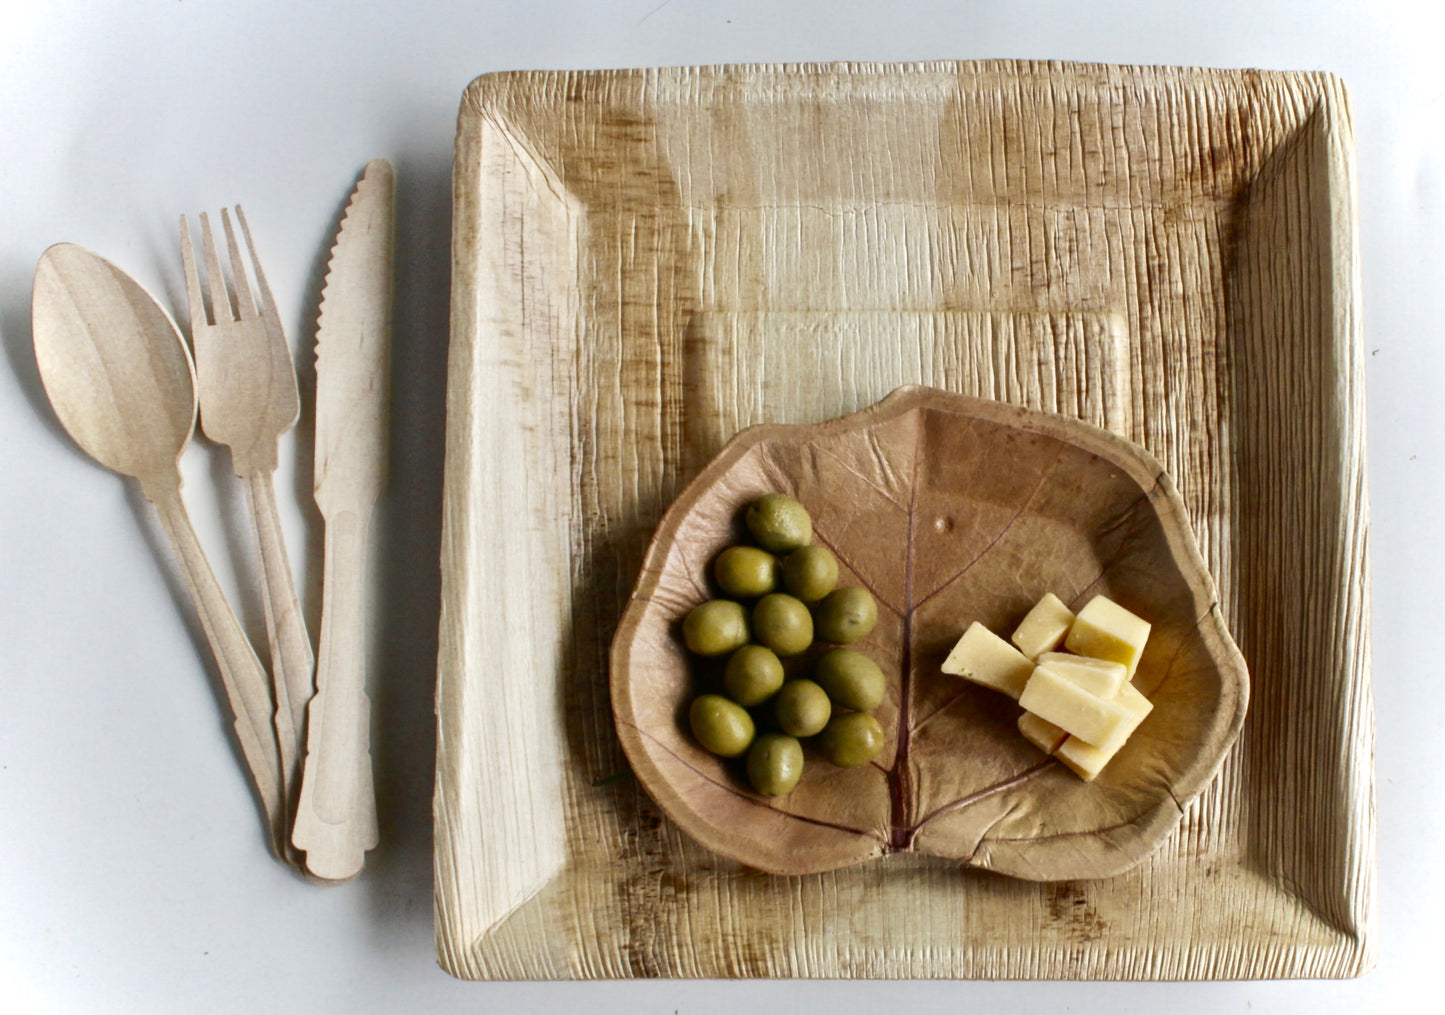 Bamboo Type palm leaf plate 20 pic Square 10" - Seagrape 20 pice Natural Leaf 7" - 30 Utensils Biodegradable